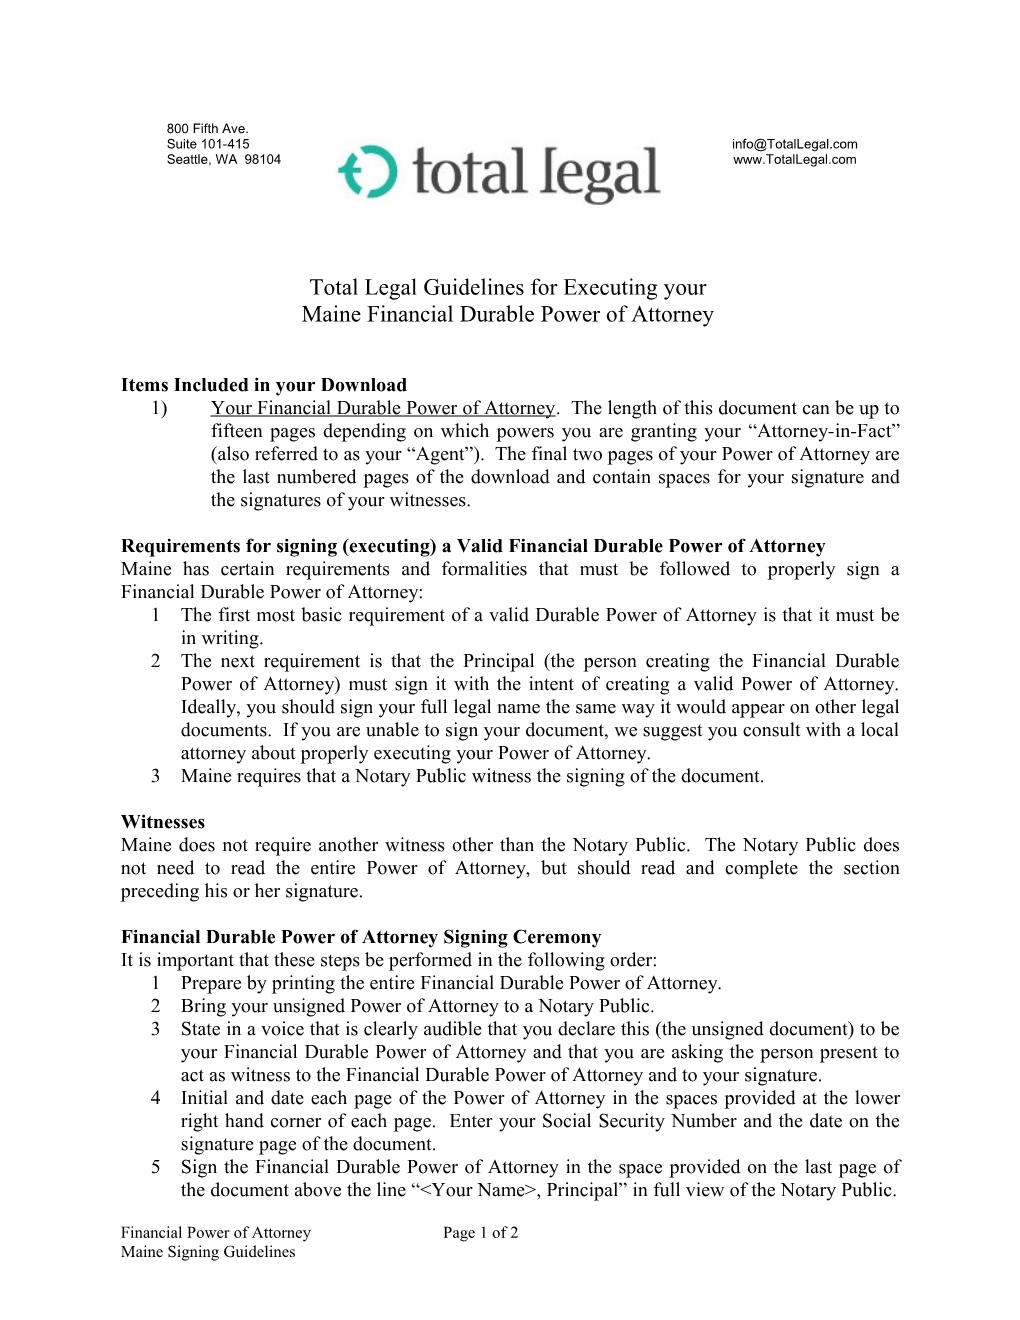 Total Legal Guidelines for Executing Your